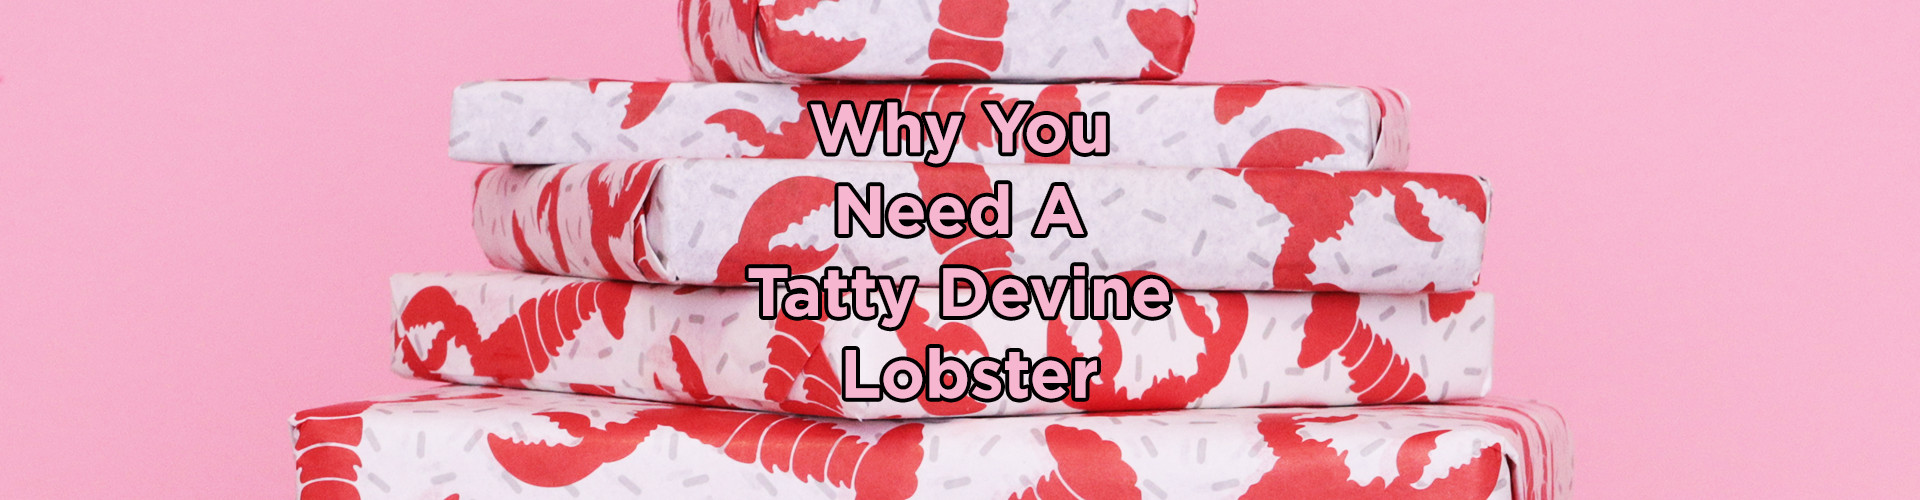 Why You Need A Tatty Devine Lobster